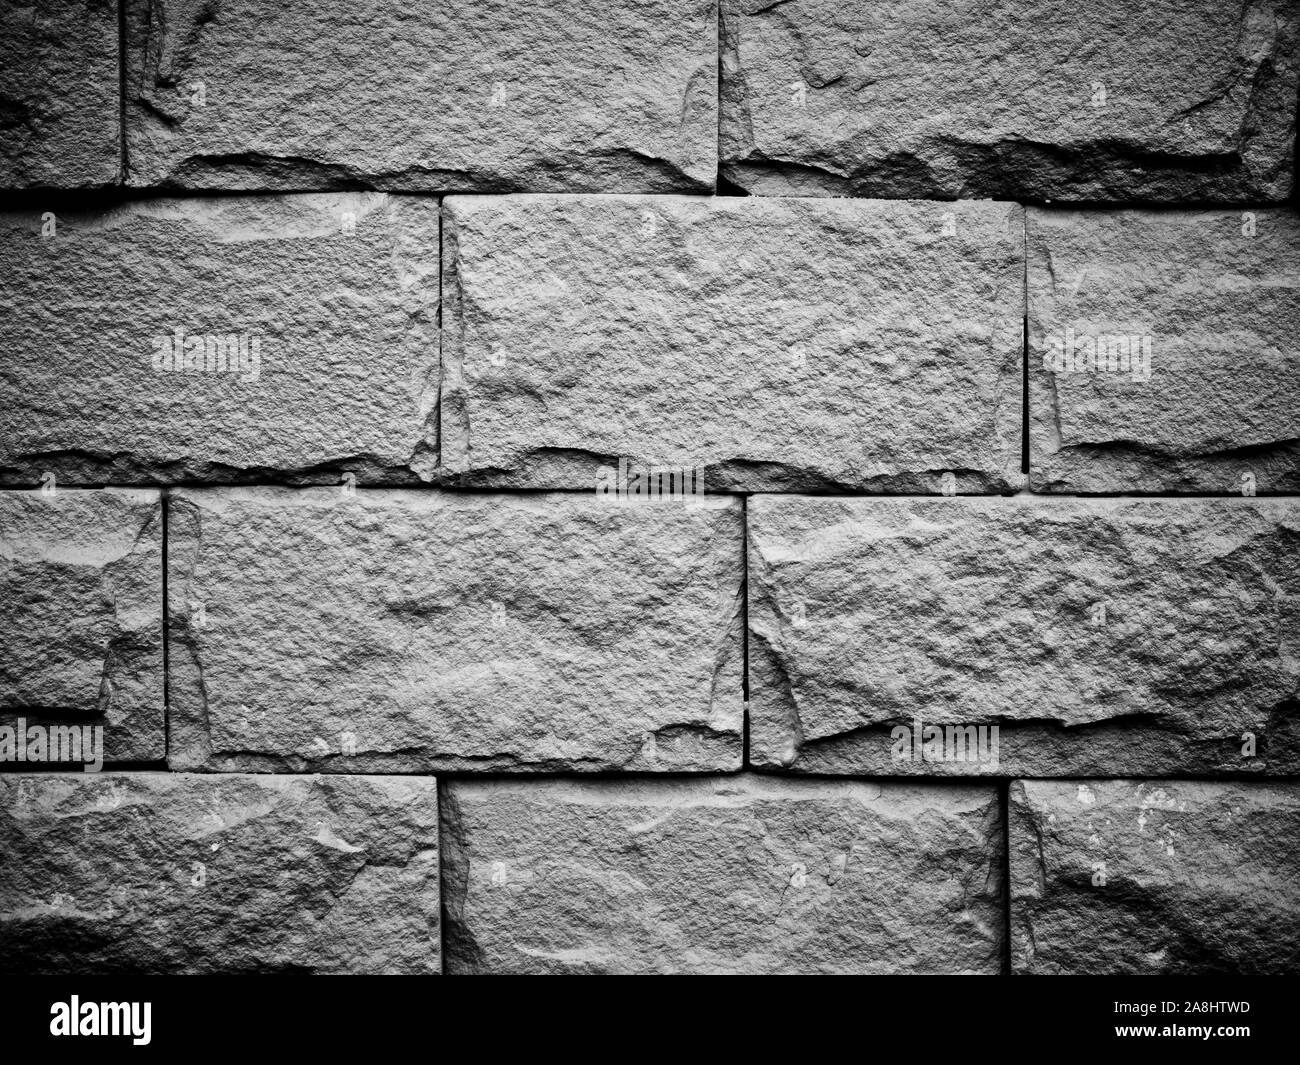 The wall made from Sandstone bricks Stock Photo